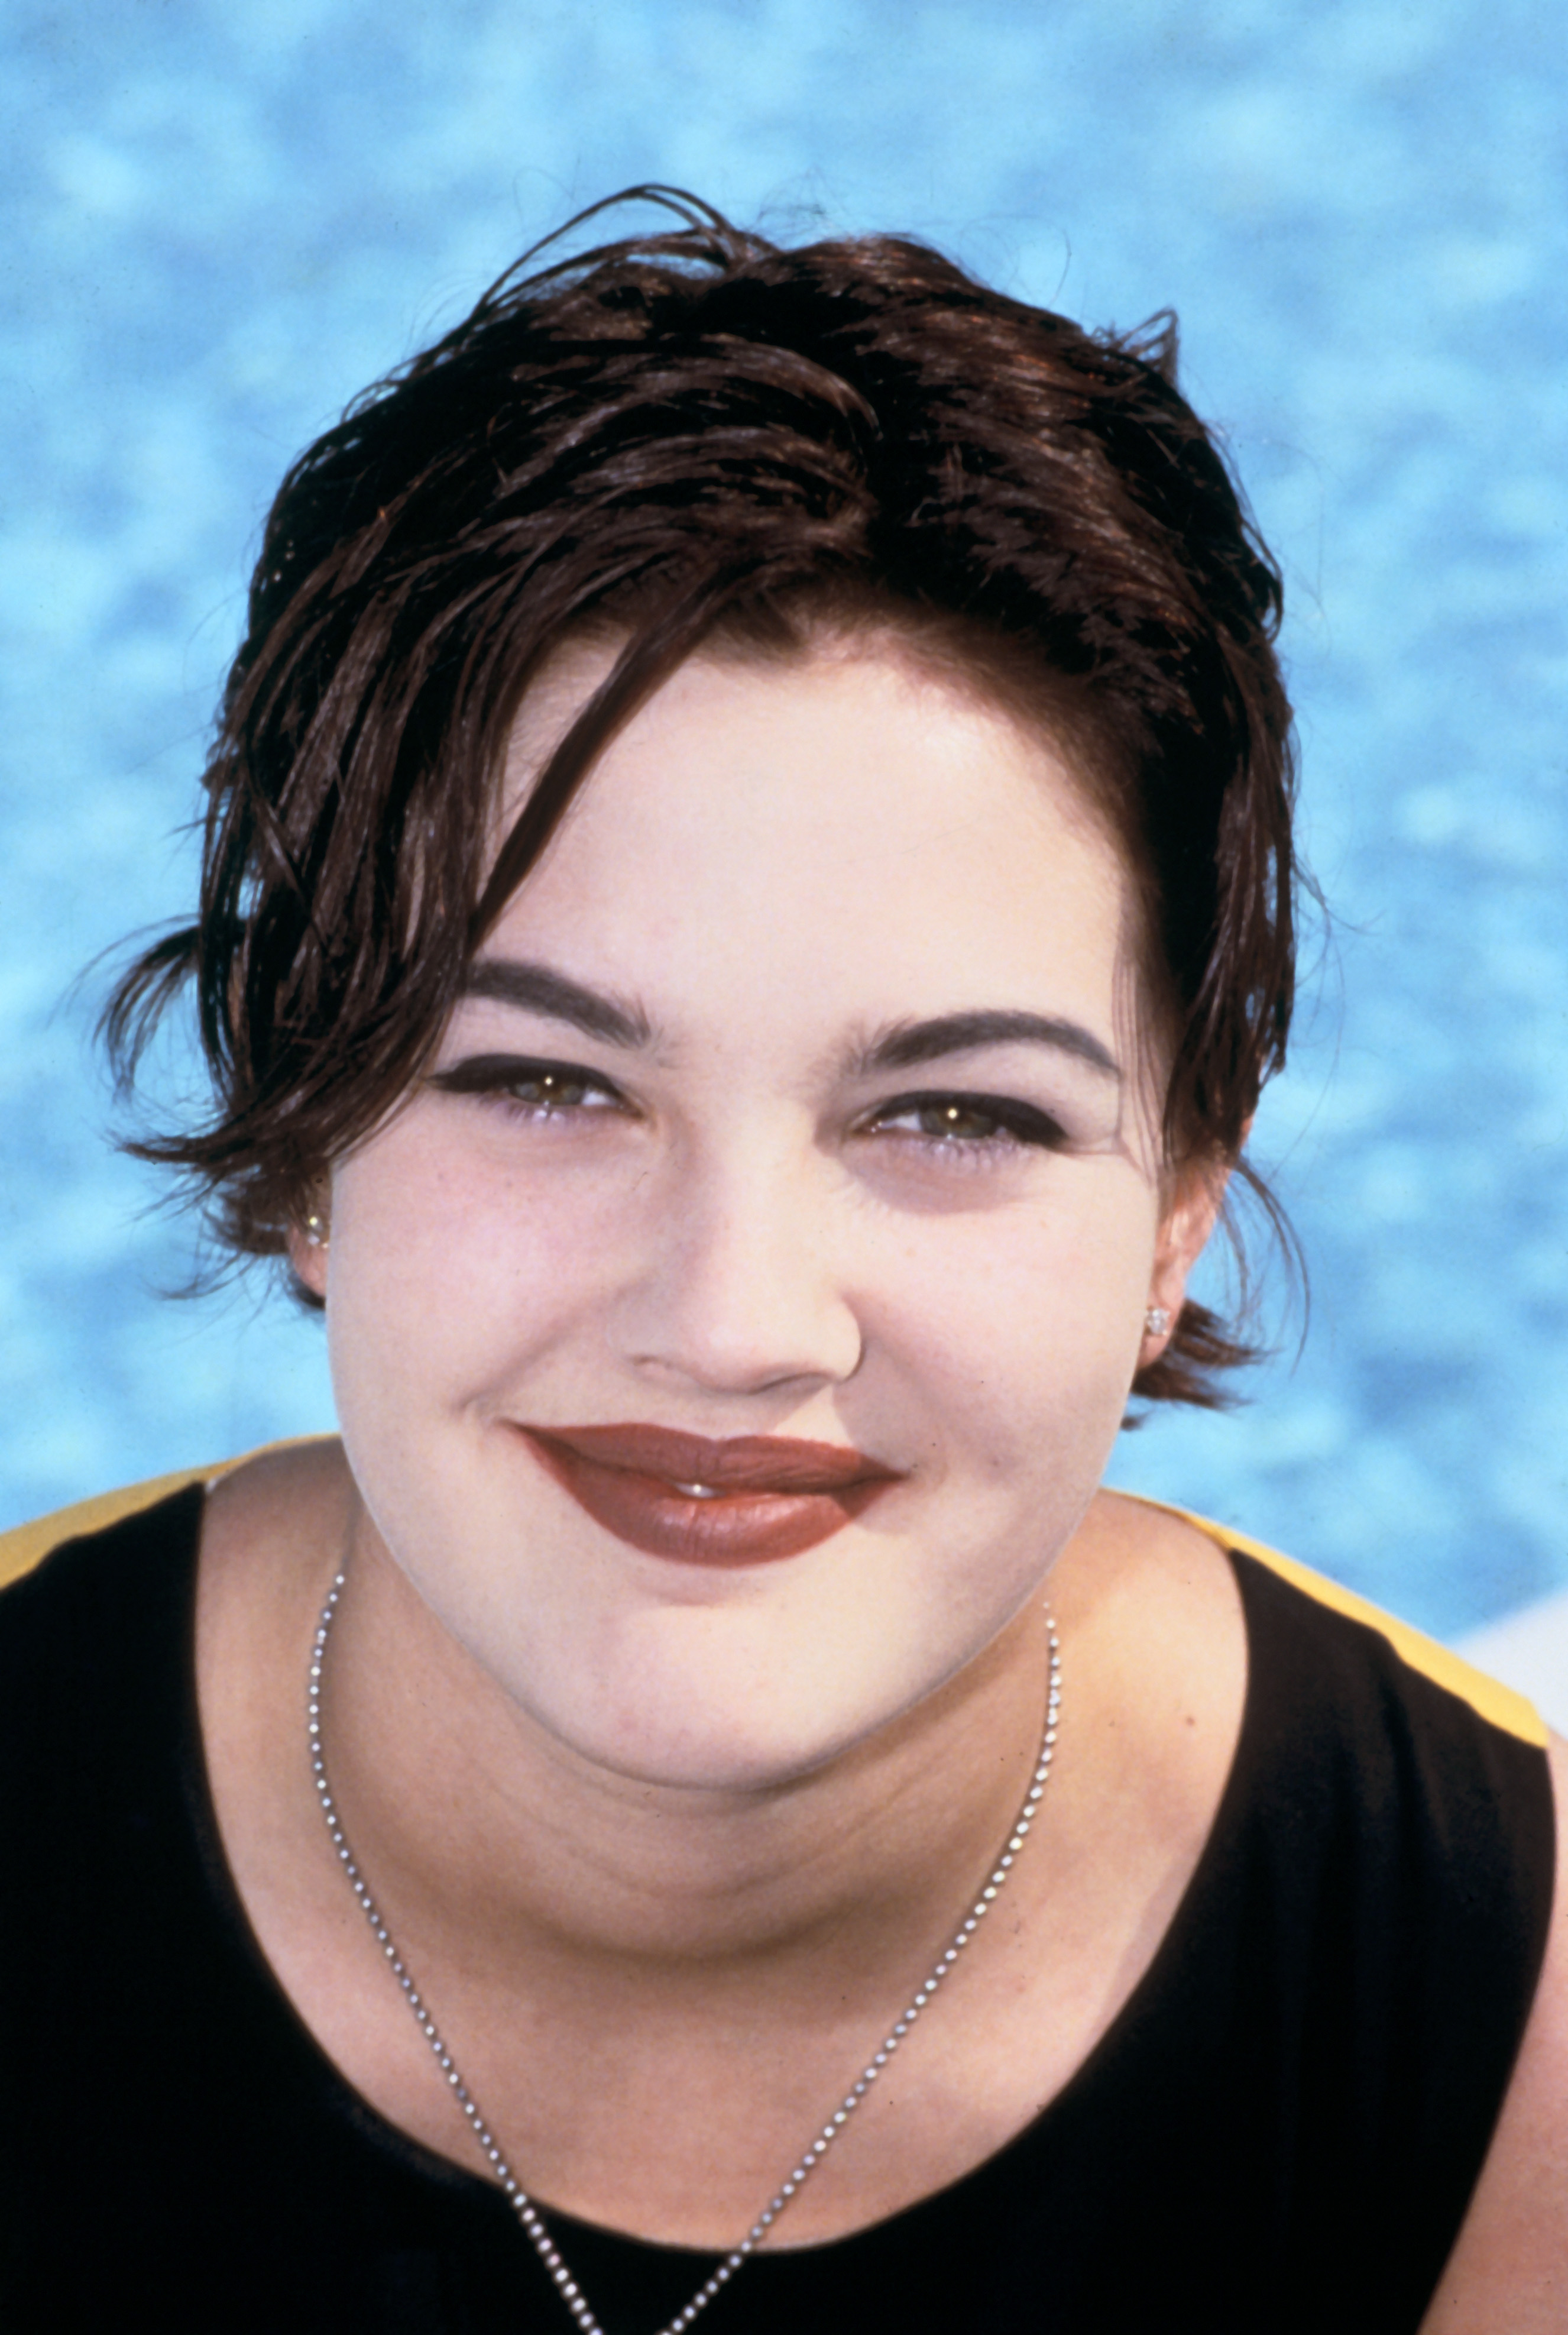 Drew Barrymore photographed on January 1, 1990 | Source: Getty Images